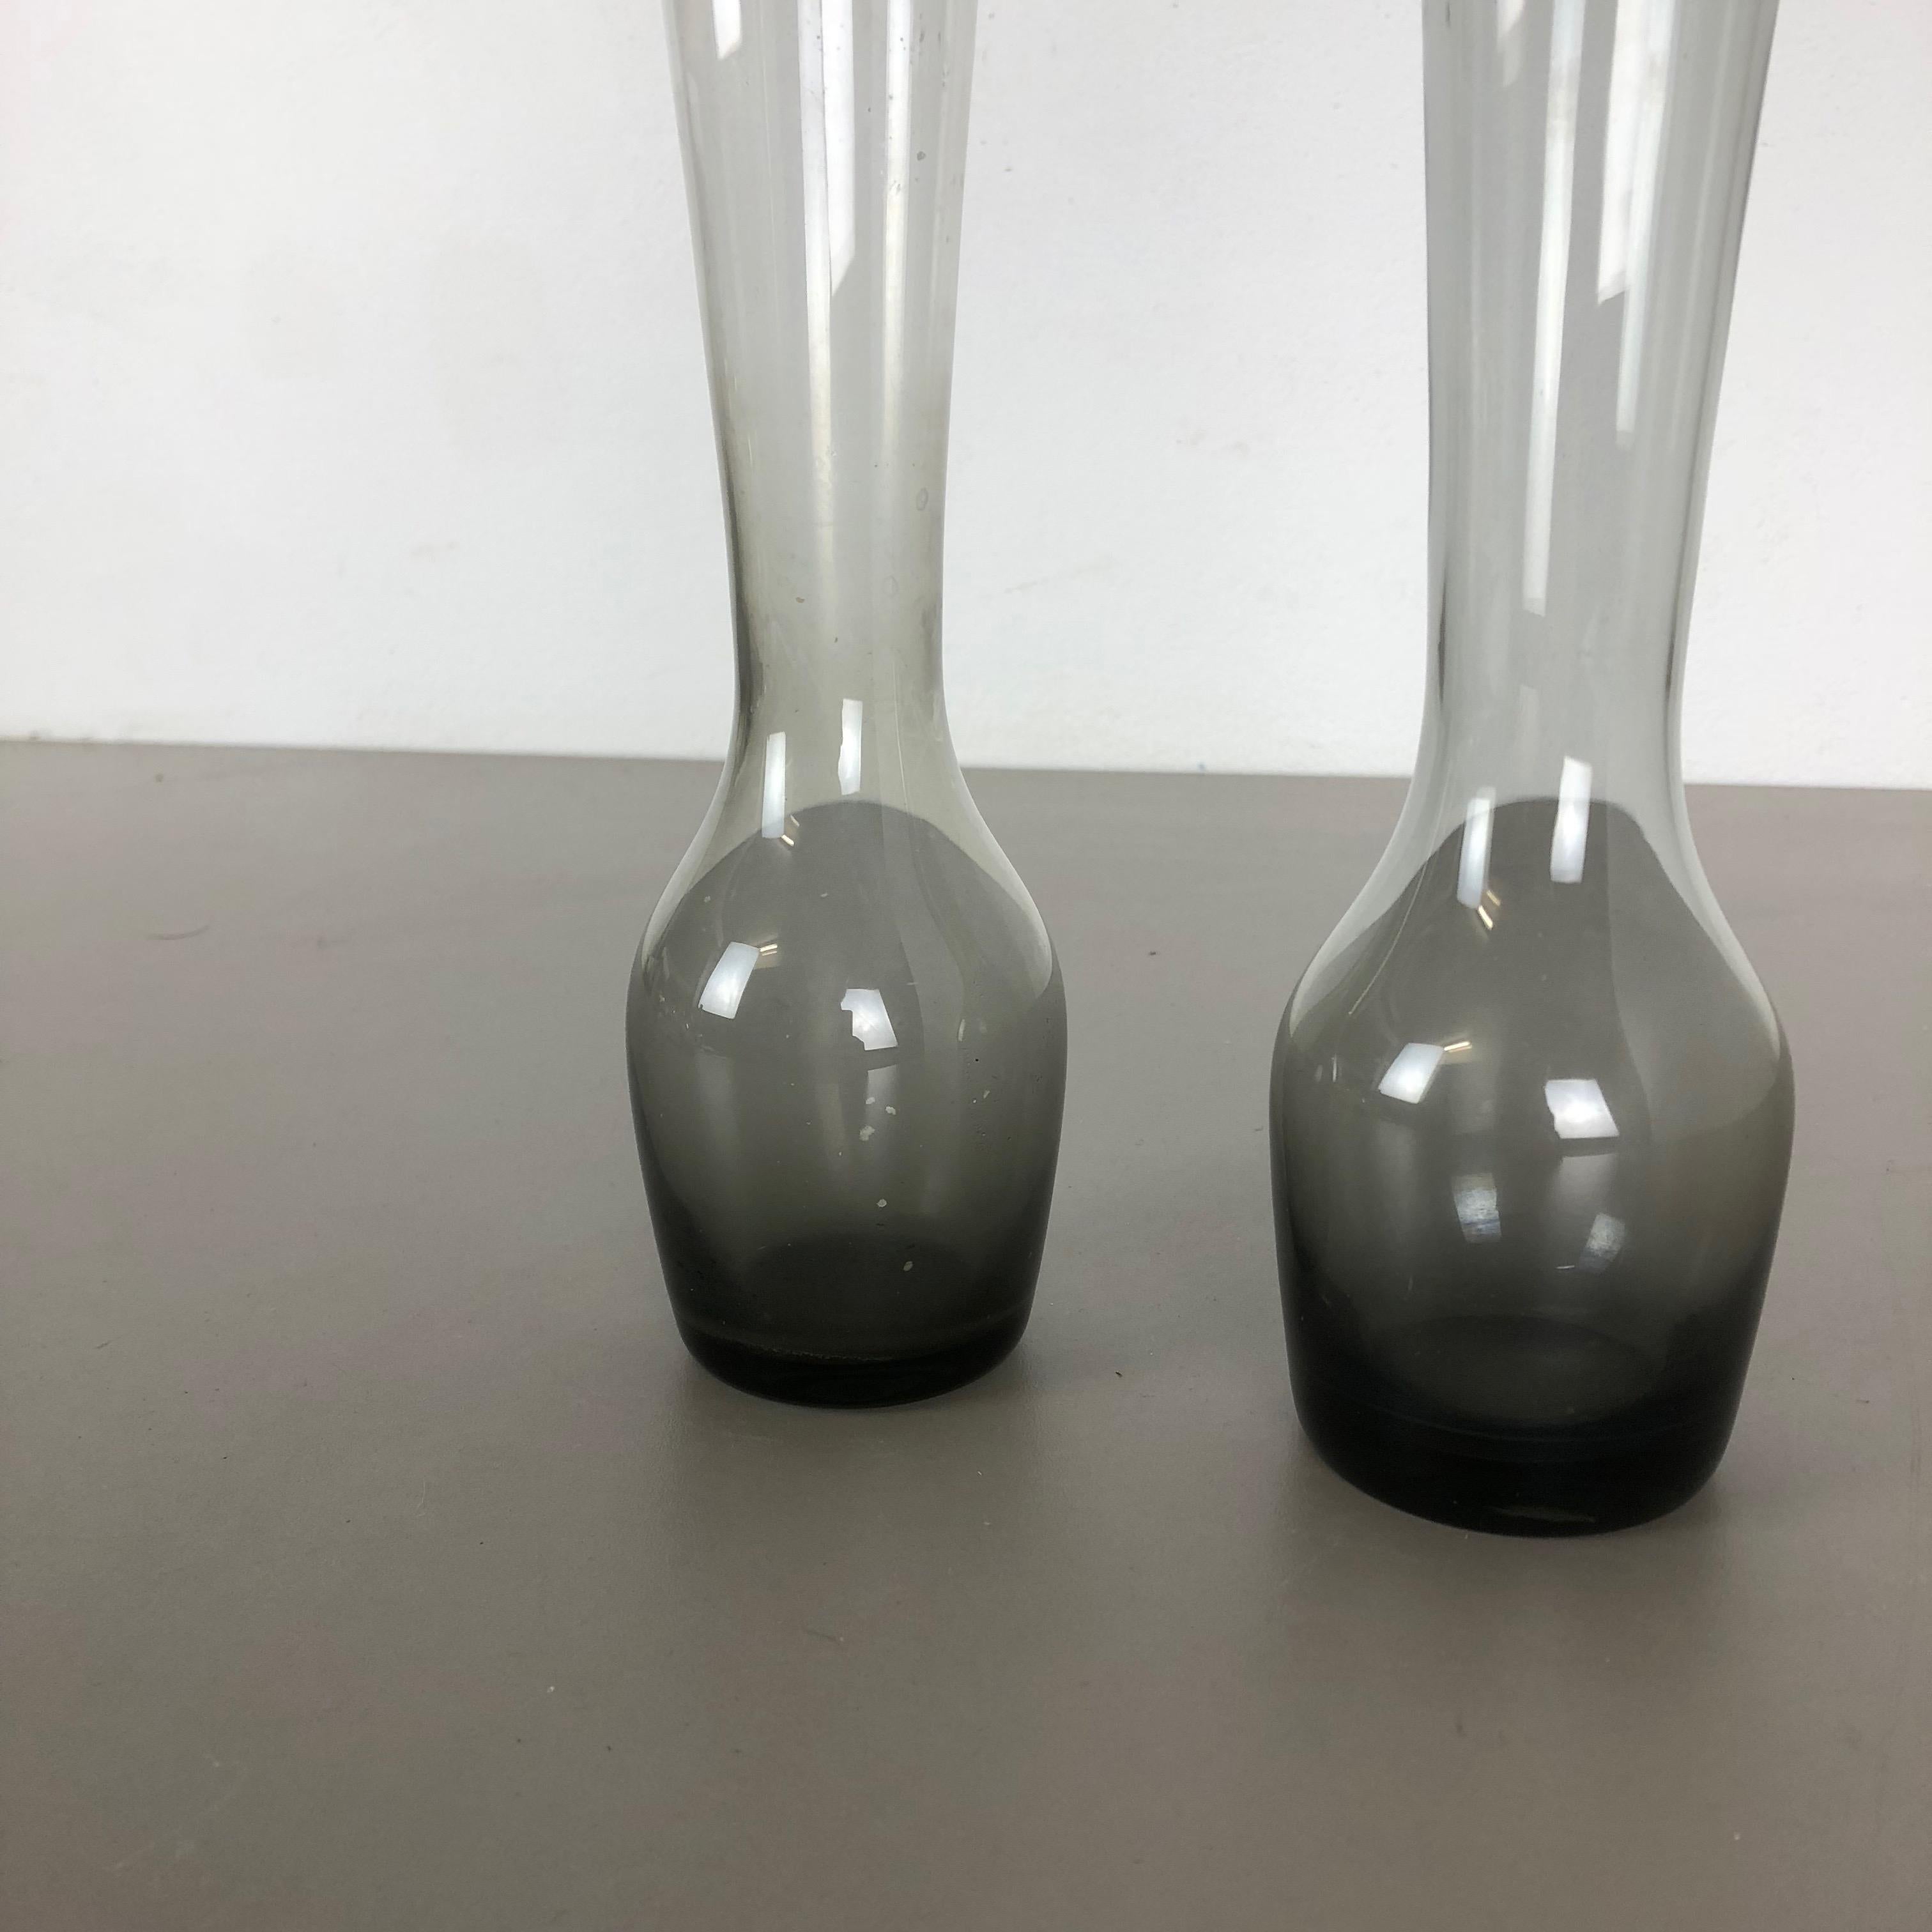 Vintage 1960s Set of 2 Turmalin Vases by Wilhelm Wagenfeld for WMF, Germany In Good Condition For Sale In Kirchlengern, DE